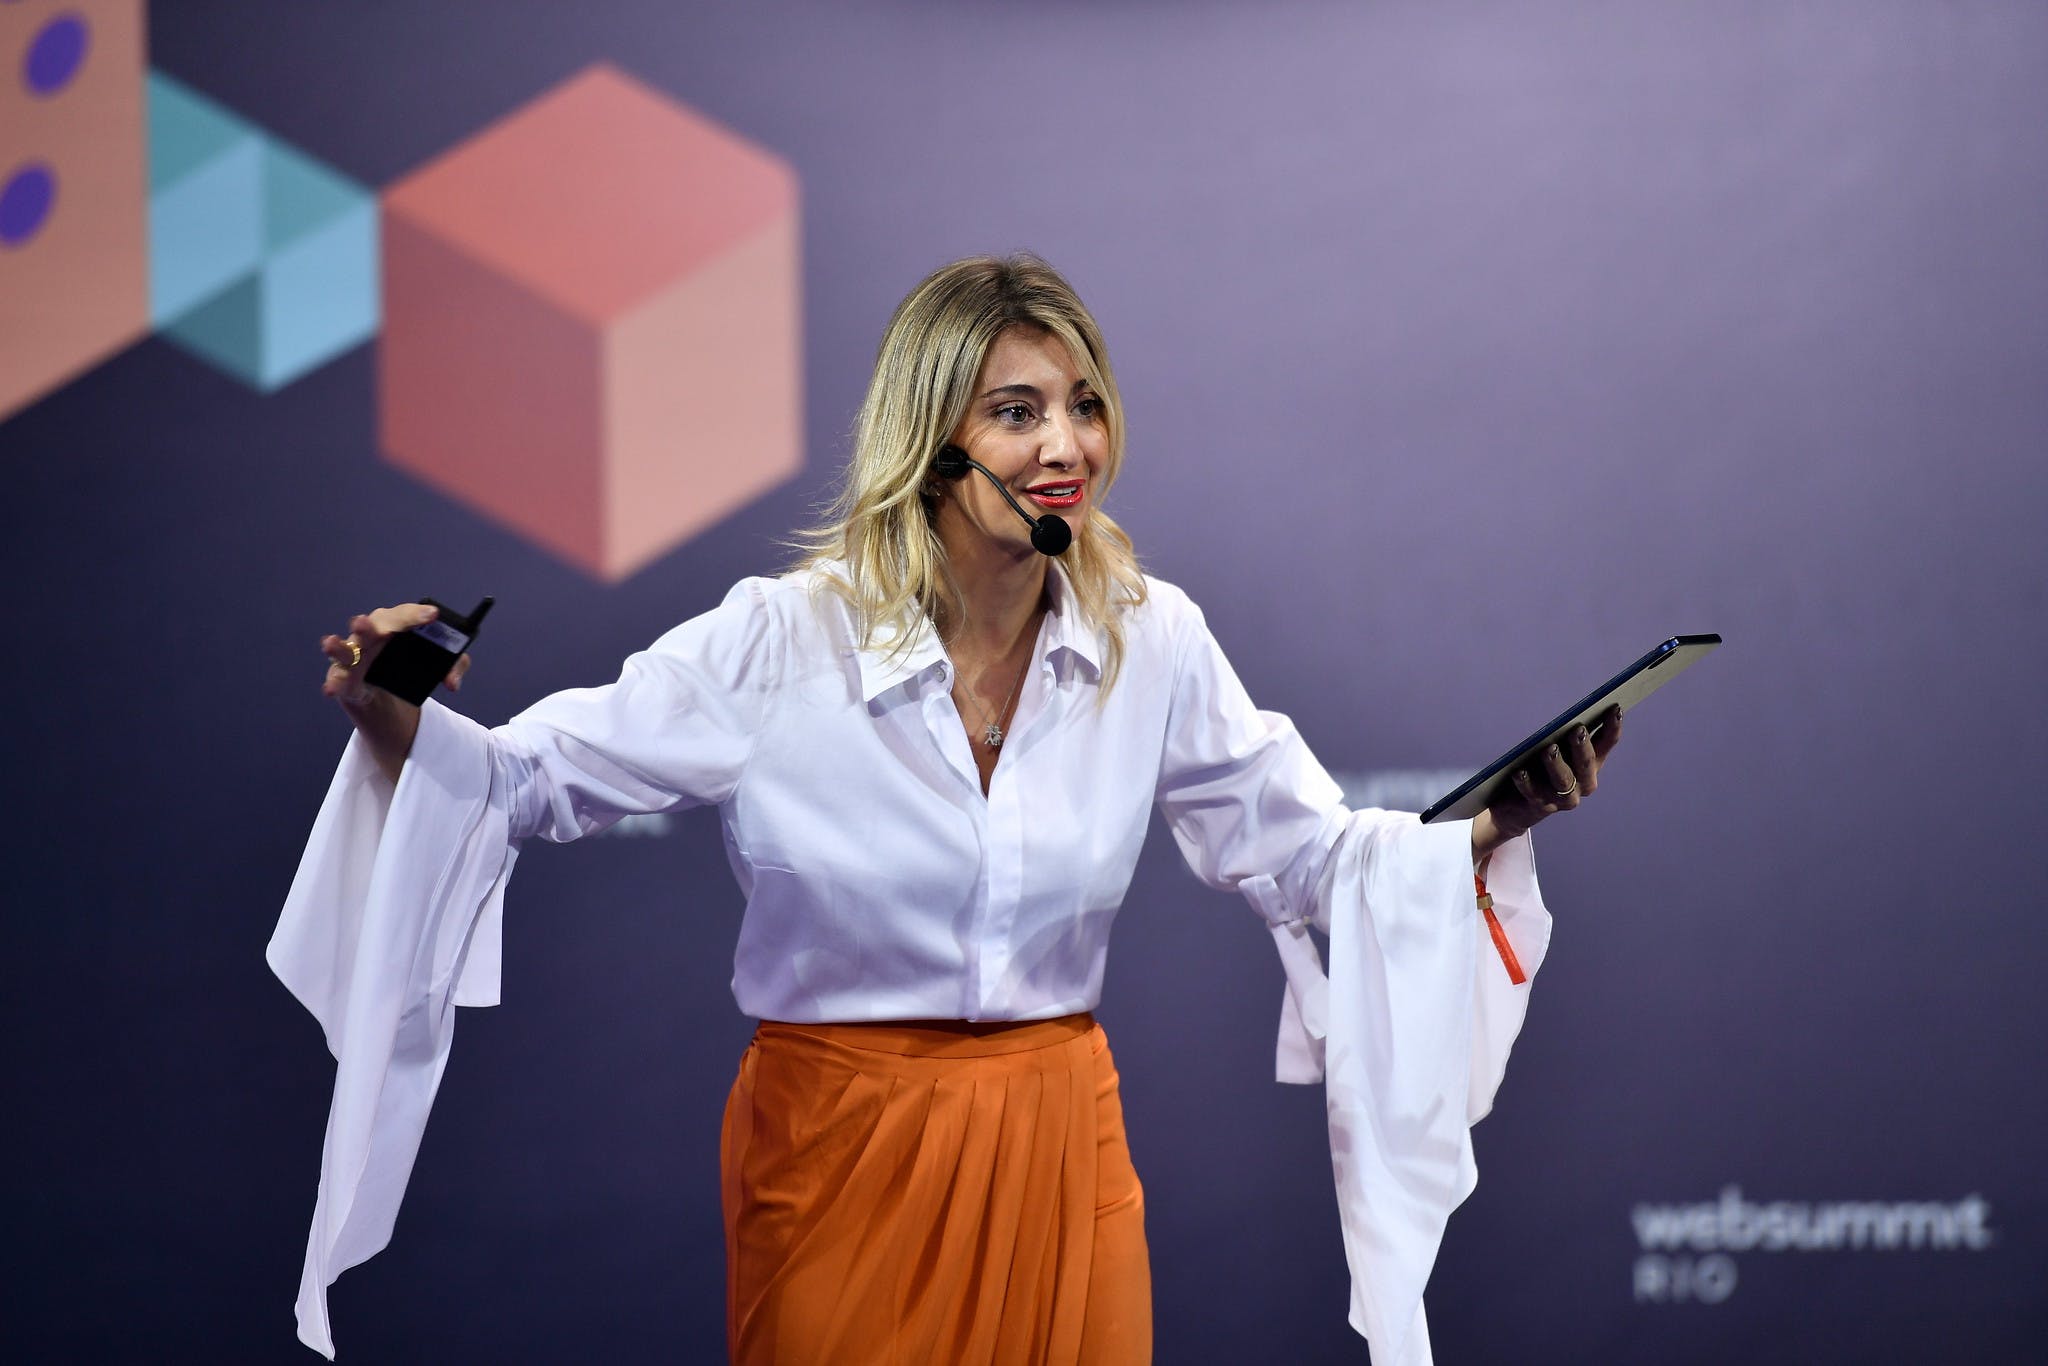 Monique Lima, co-founder and CEO, Mimo Live Sales, stands on stage with arms outstretched while speaking. Monique wears a white blouse and orange skirt.